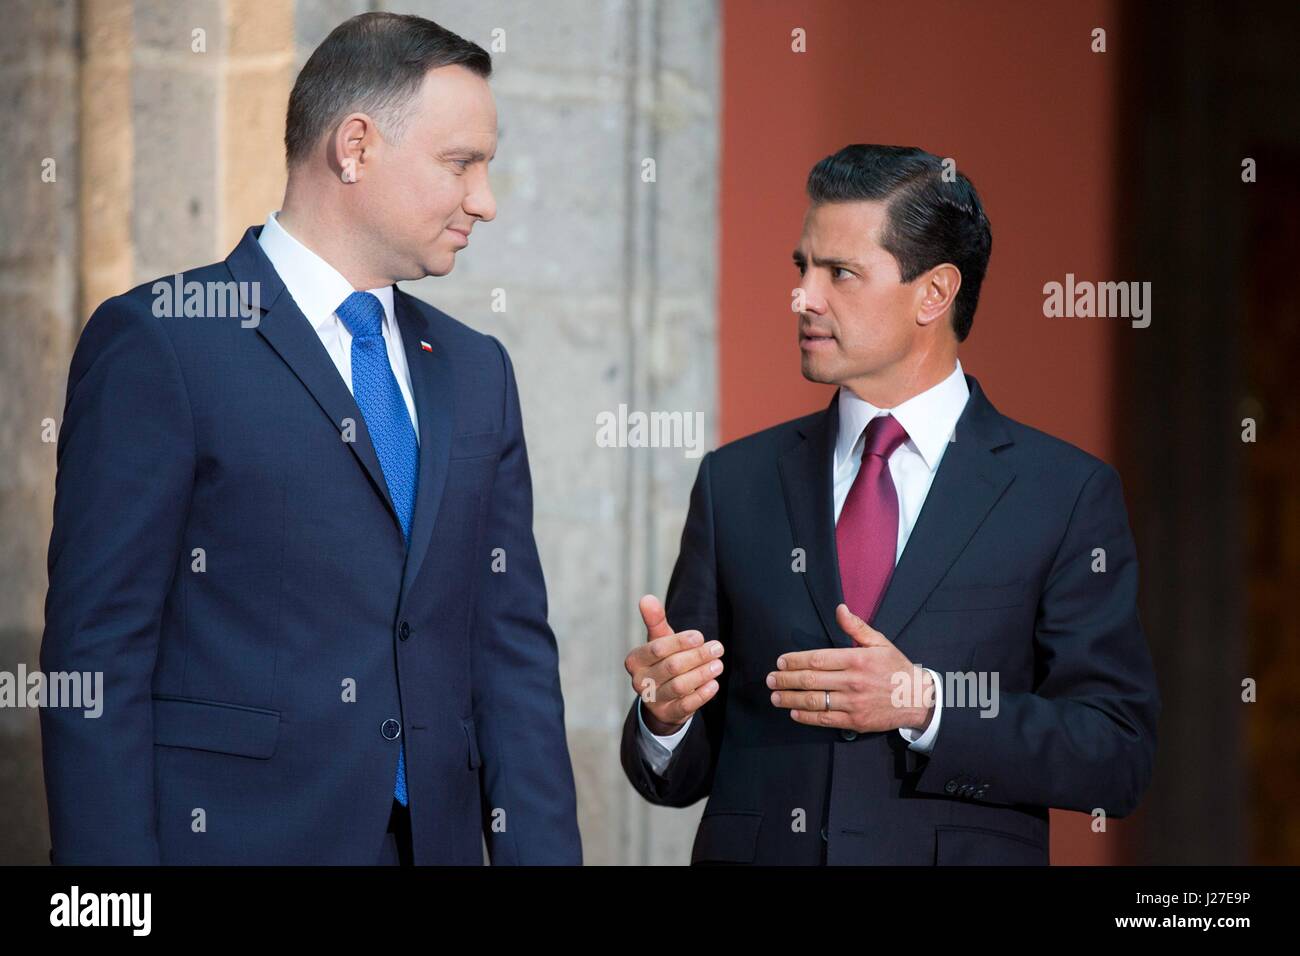 Mexican President Enrique Pena Nieto, right, chats with Polish President Andrzej Duda during a bilateral signing ceremony at the national palace April 24, 2017 in Mexico City, Mexico. Stock Photo